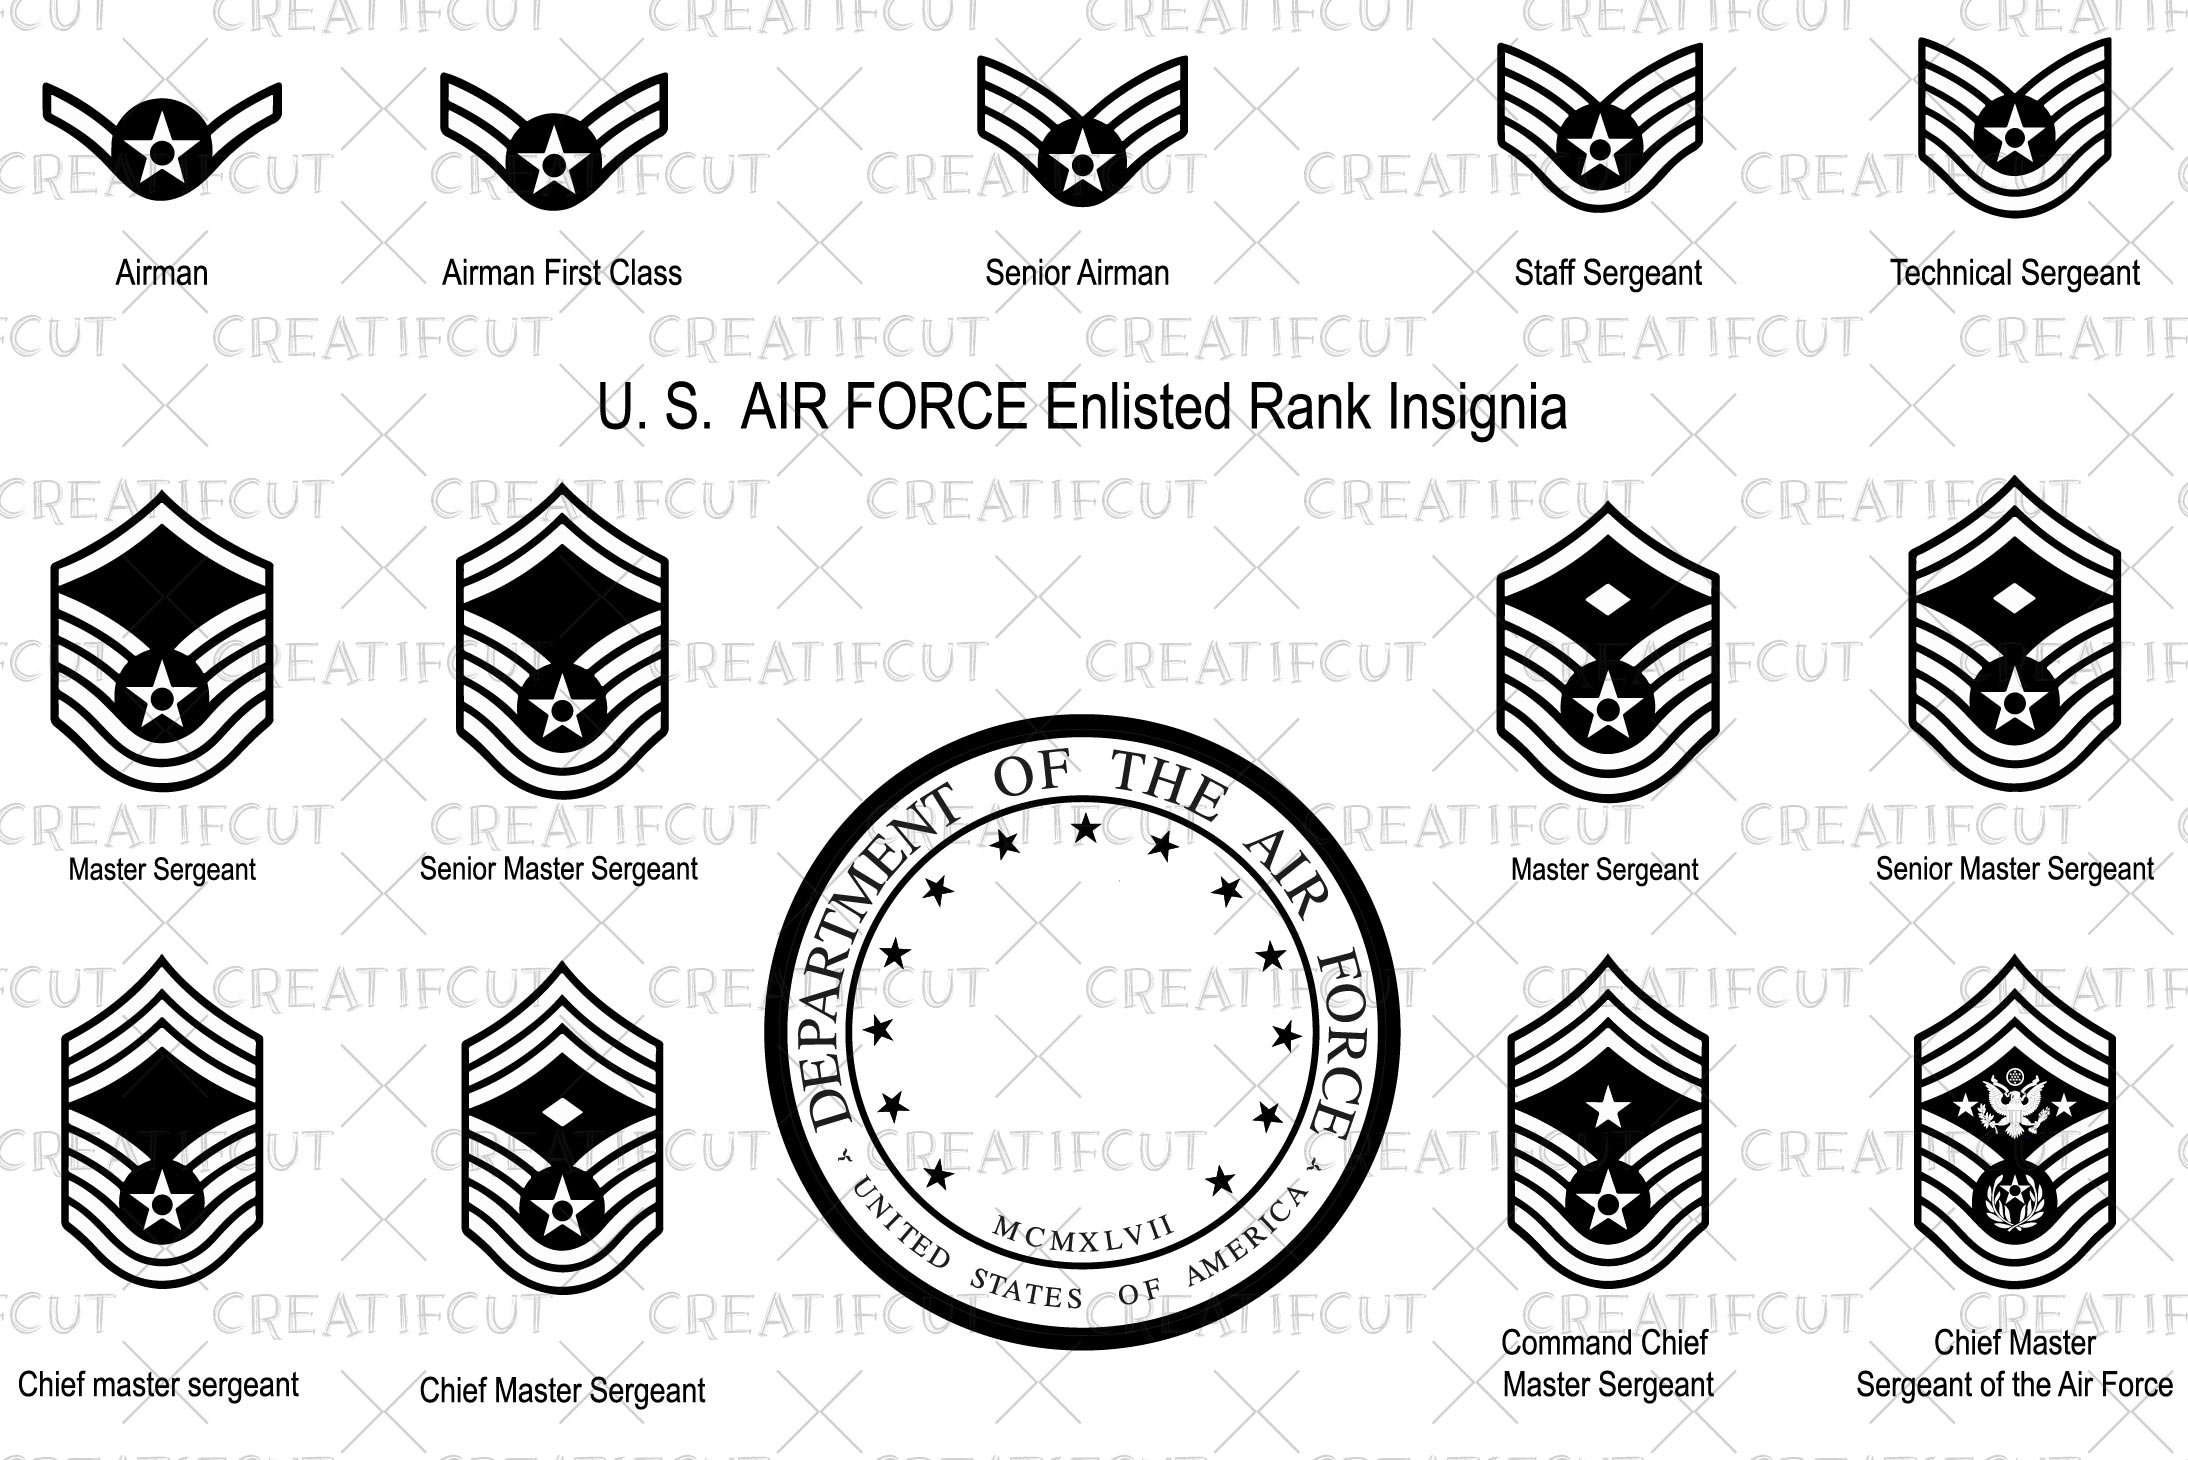 Air Force Rank Structure Enlisted | brebdude.com